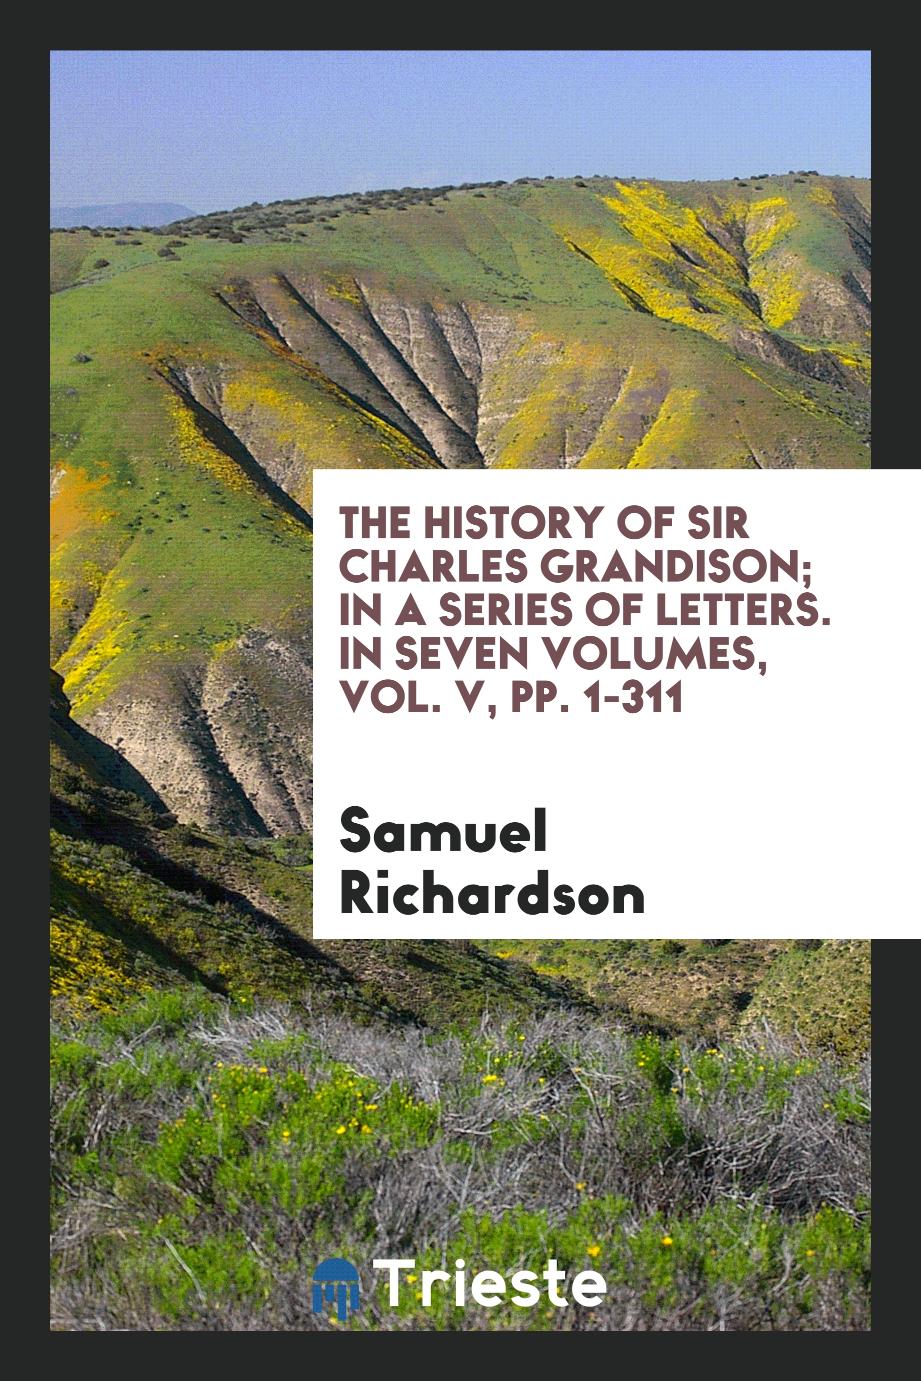 The History of Sir Charles Grandison; In a Series of Letters. In Seven Volumes, Vol. V, pp. 1-311